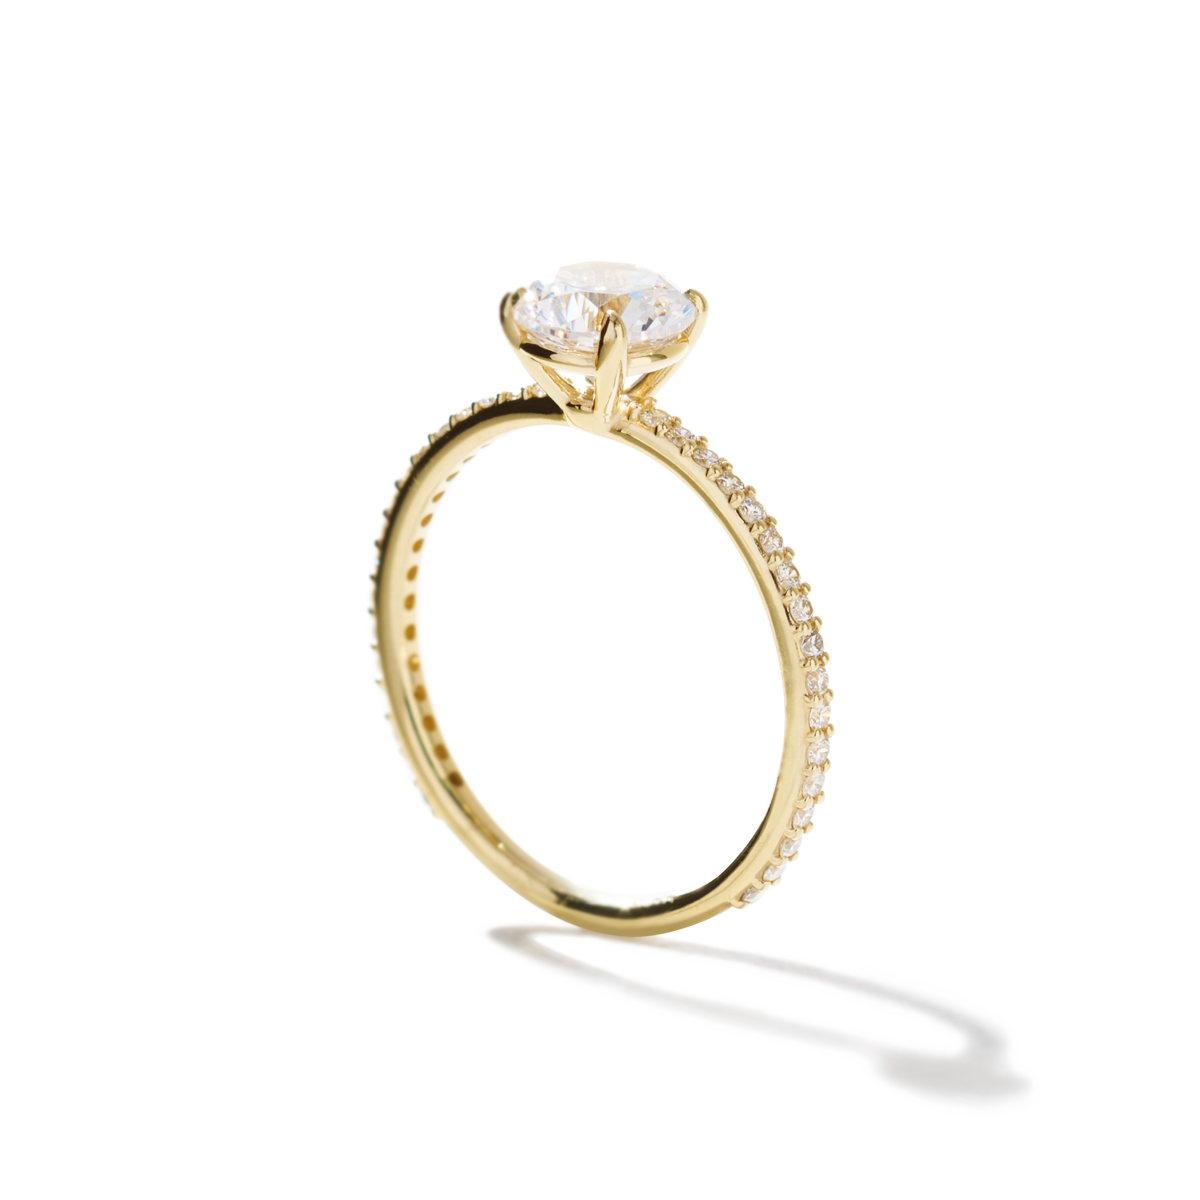 18K Yellow Gold Round Pave Solitaire Engagement Ring